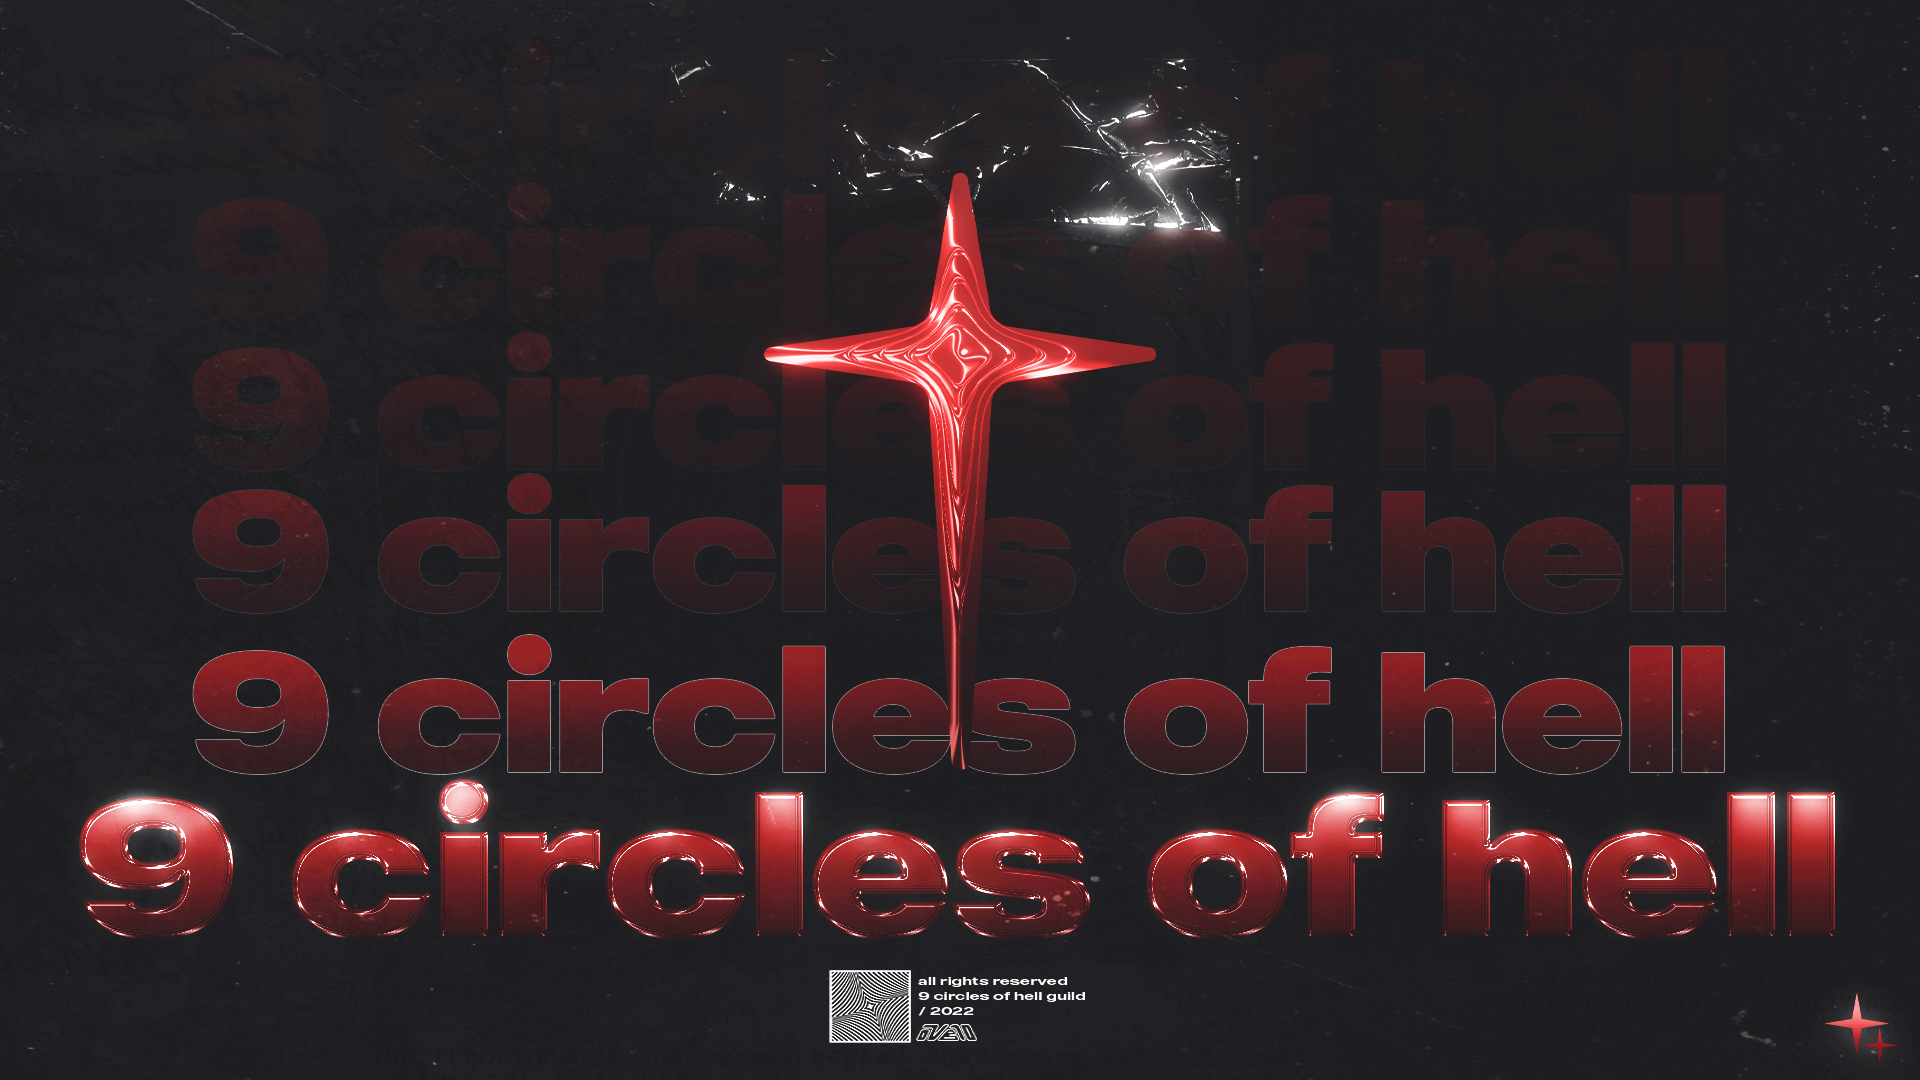 9 circles of hell background